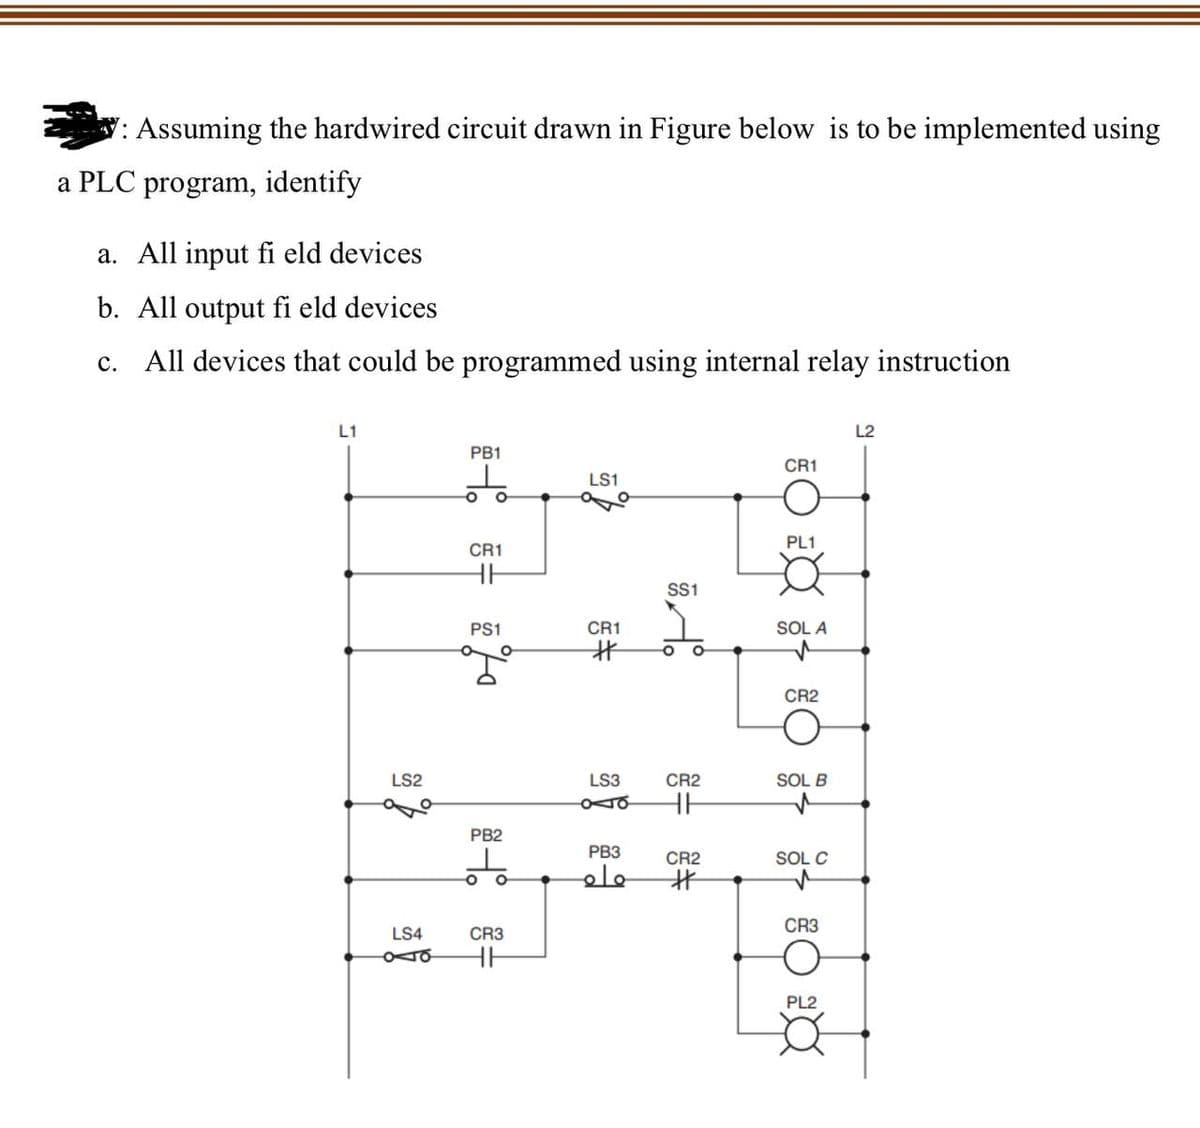 : Assuming the hardwired circuit drawn in Figure below is to be implemented using
a PLC program, identify
a. All input fi eld devices
b. All output fi eld devices
C. All devices that could be programmed using internal relay instruction
L1
LS2
PB1
O
CR1
HH
PS1
ya
PB2
ㅎ
O
LS4
CR3
Oo HH
LS1
CR1
#
LS3
oo
PB3
ماه
SS1
O
CR2
=
CR2
#
CR1
PL1
SOL A
CR2
SOL B
SOL C
CR3
PL2
X
L2